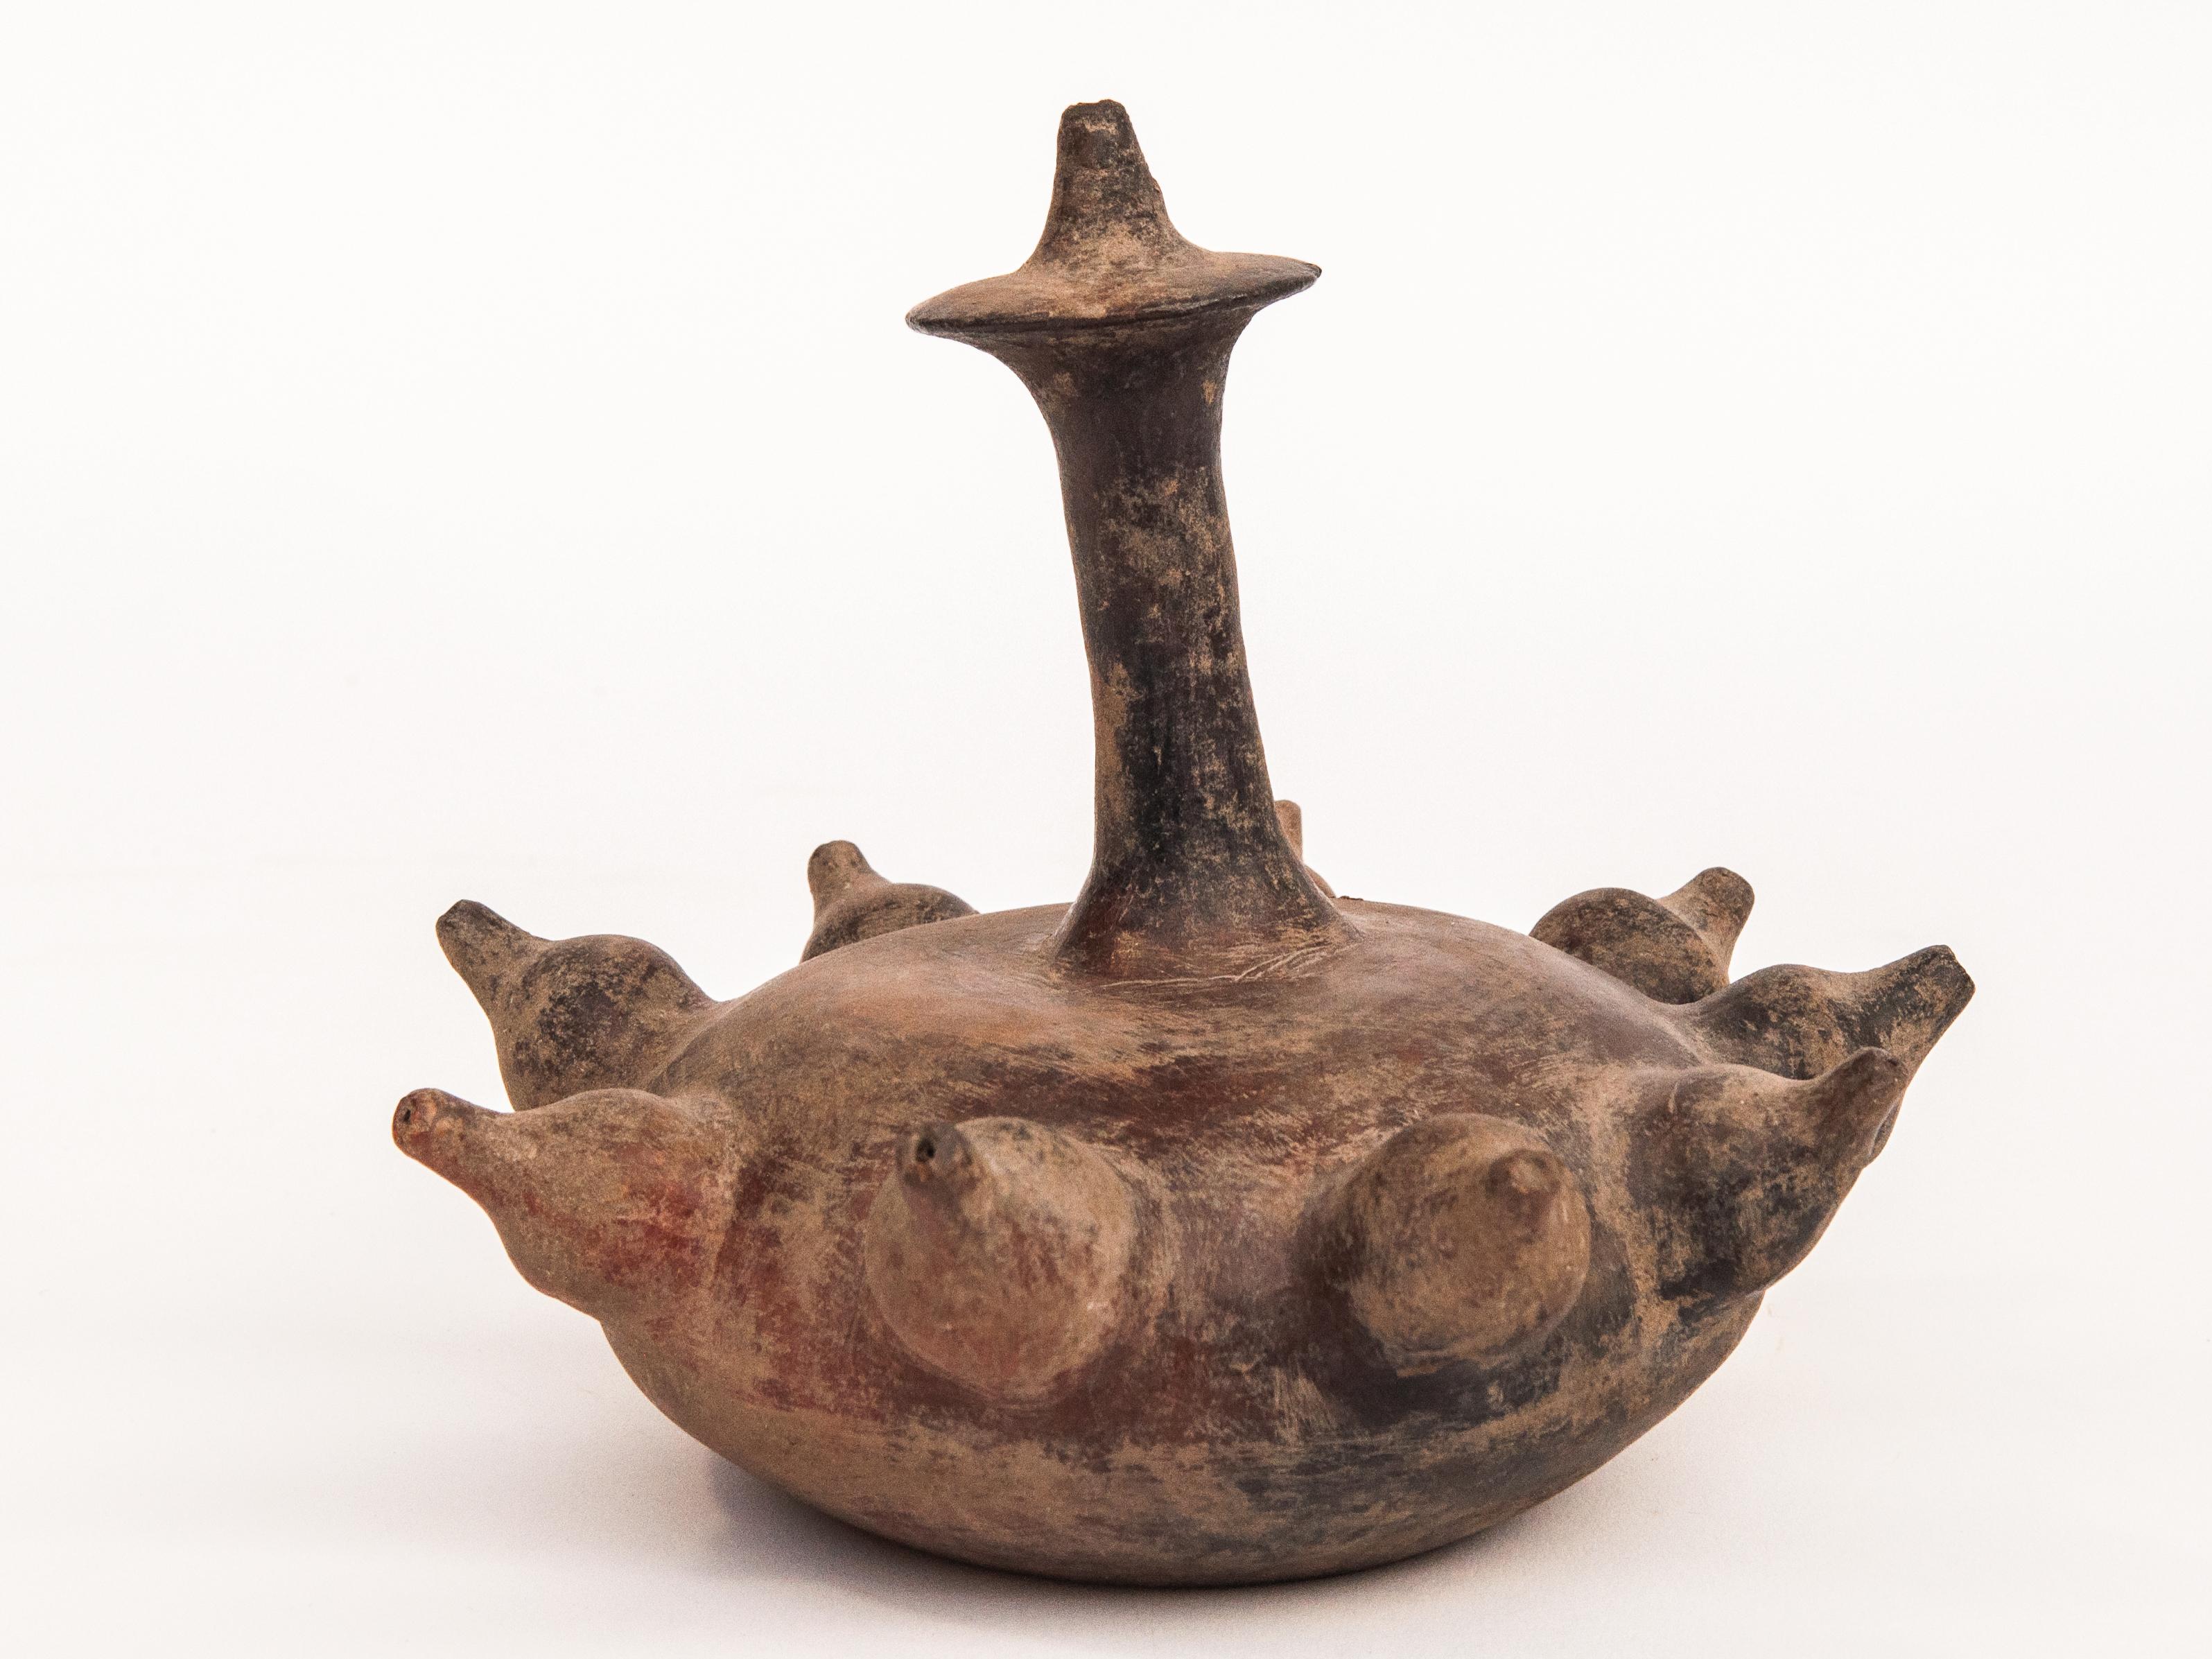 Hand-Crafted Old Earthenware Kendi, Majapahit Style, North or East Java, Late 19th Century